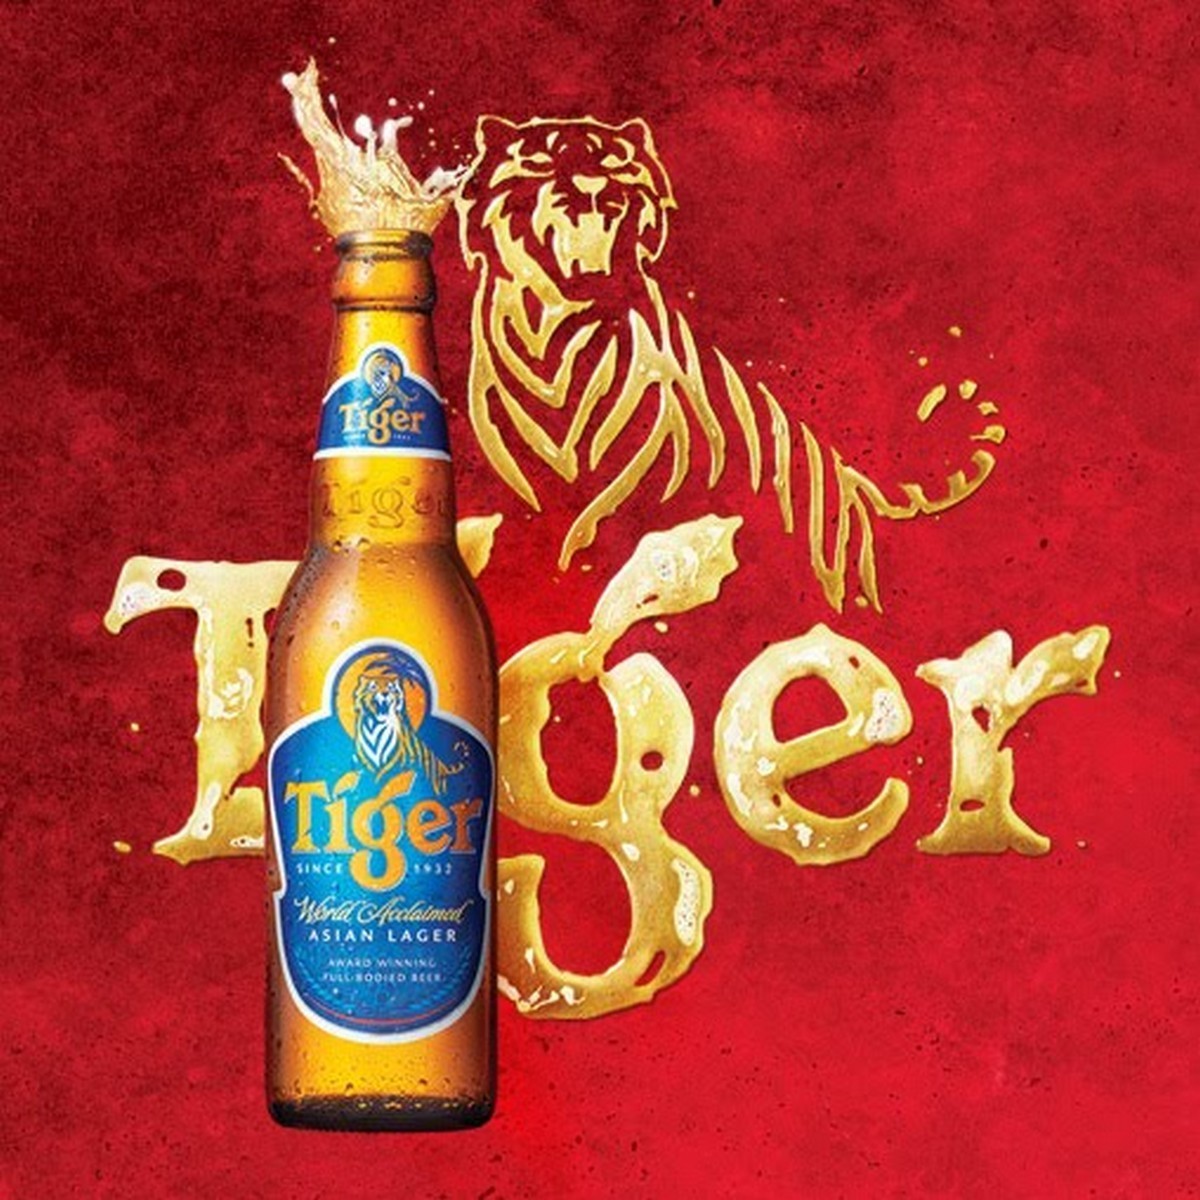 Tiger Beers Launch new Year Limited Edition Bowl with Spoon Set! Hurry